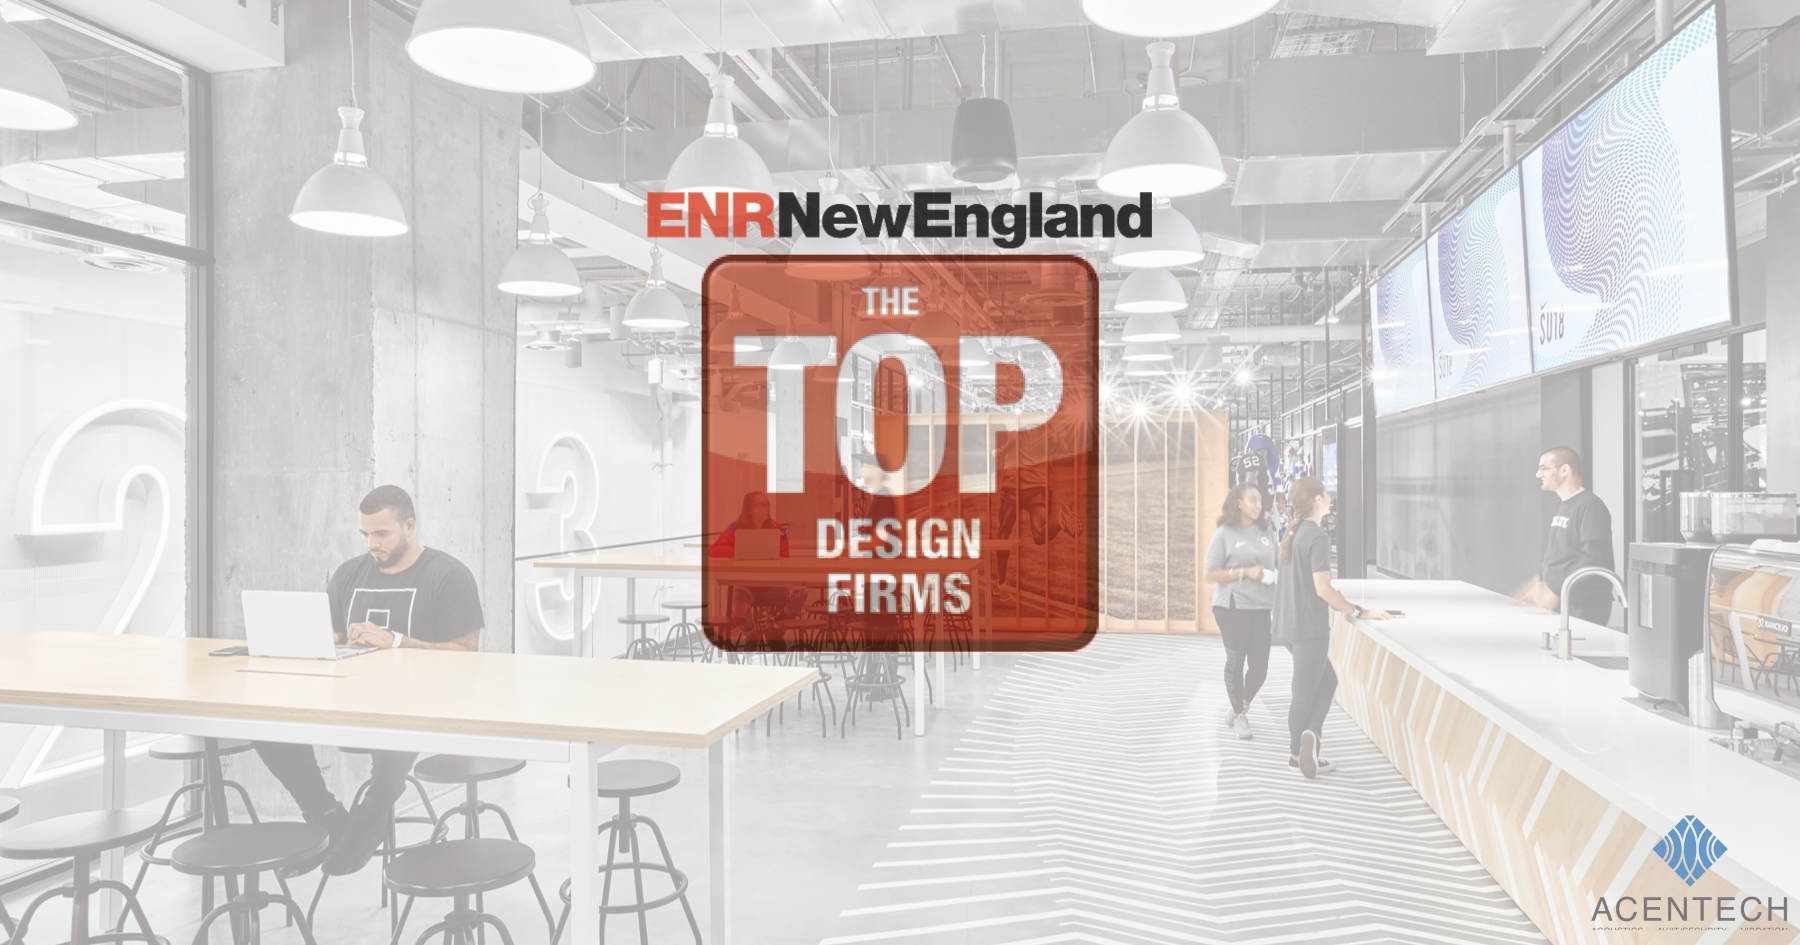 ENR New England Top design firm logo in the center of a photo of a corporate commercial cafe